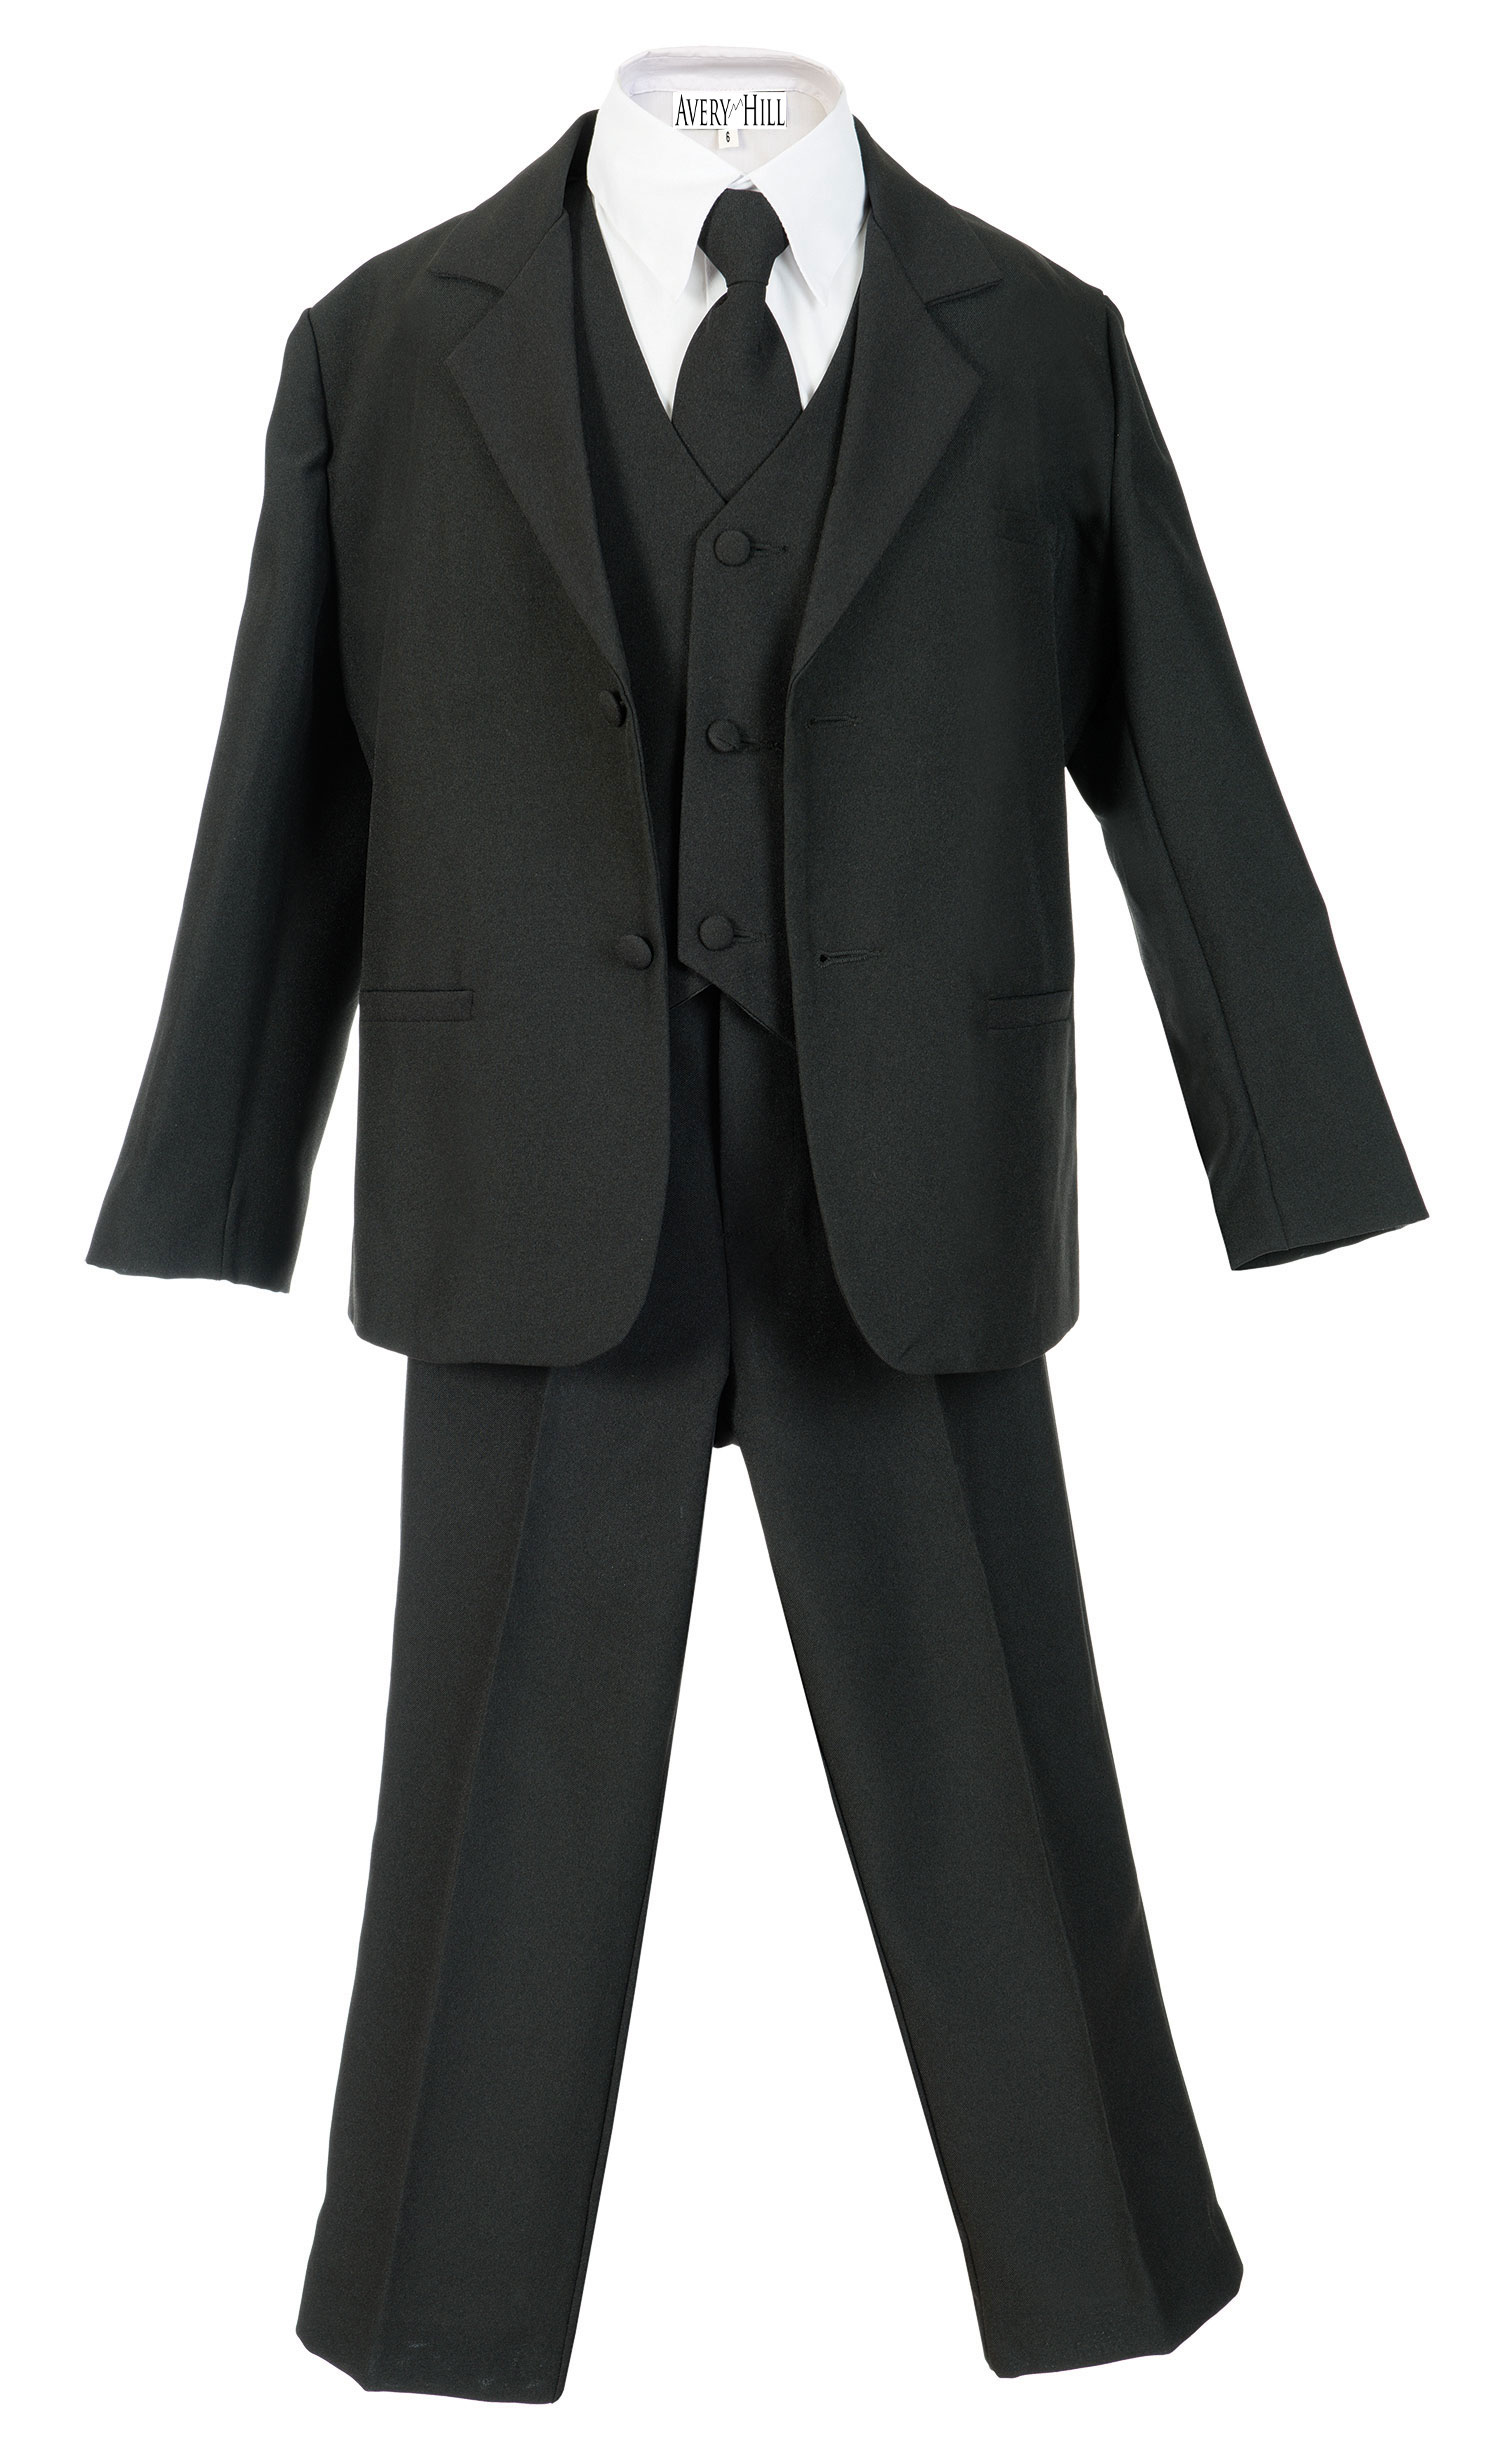 Avery Hill Boys Formal 5 Piece Suit with Shirt and Vest Black - 3T